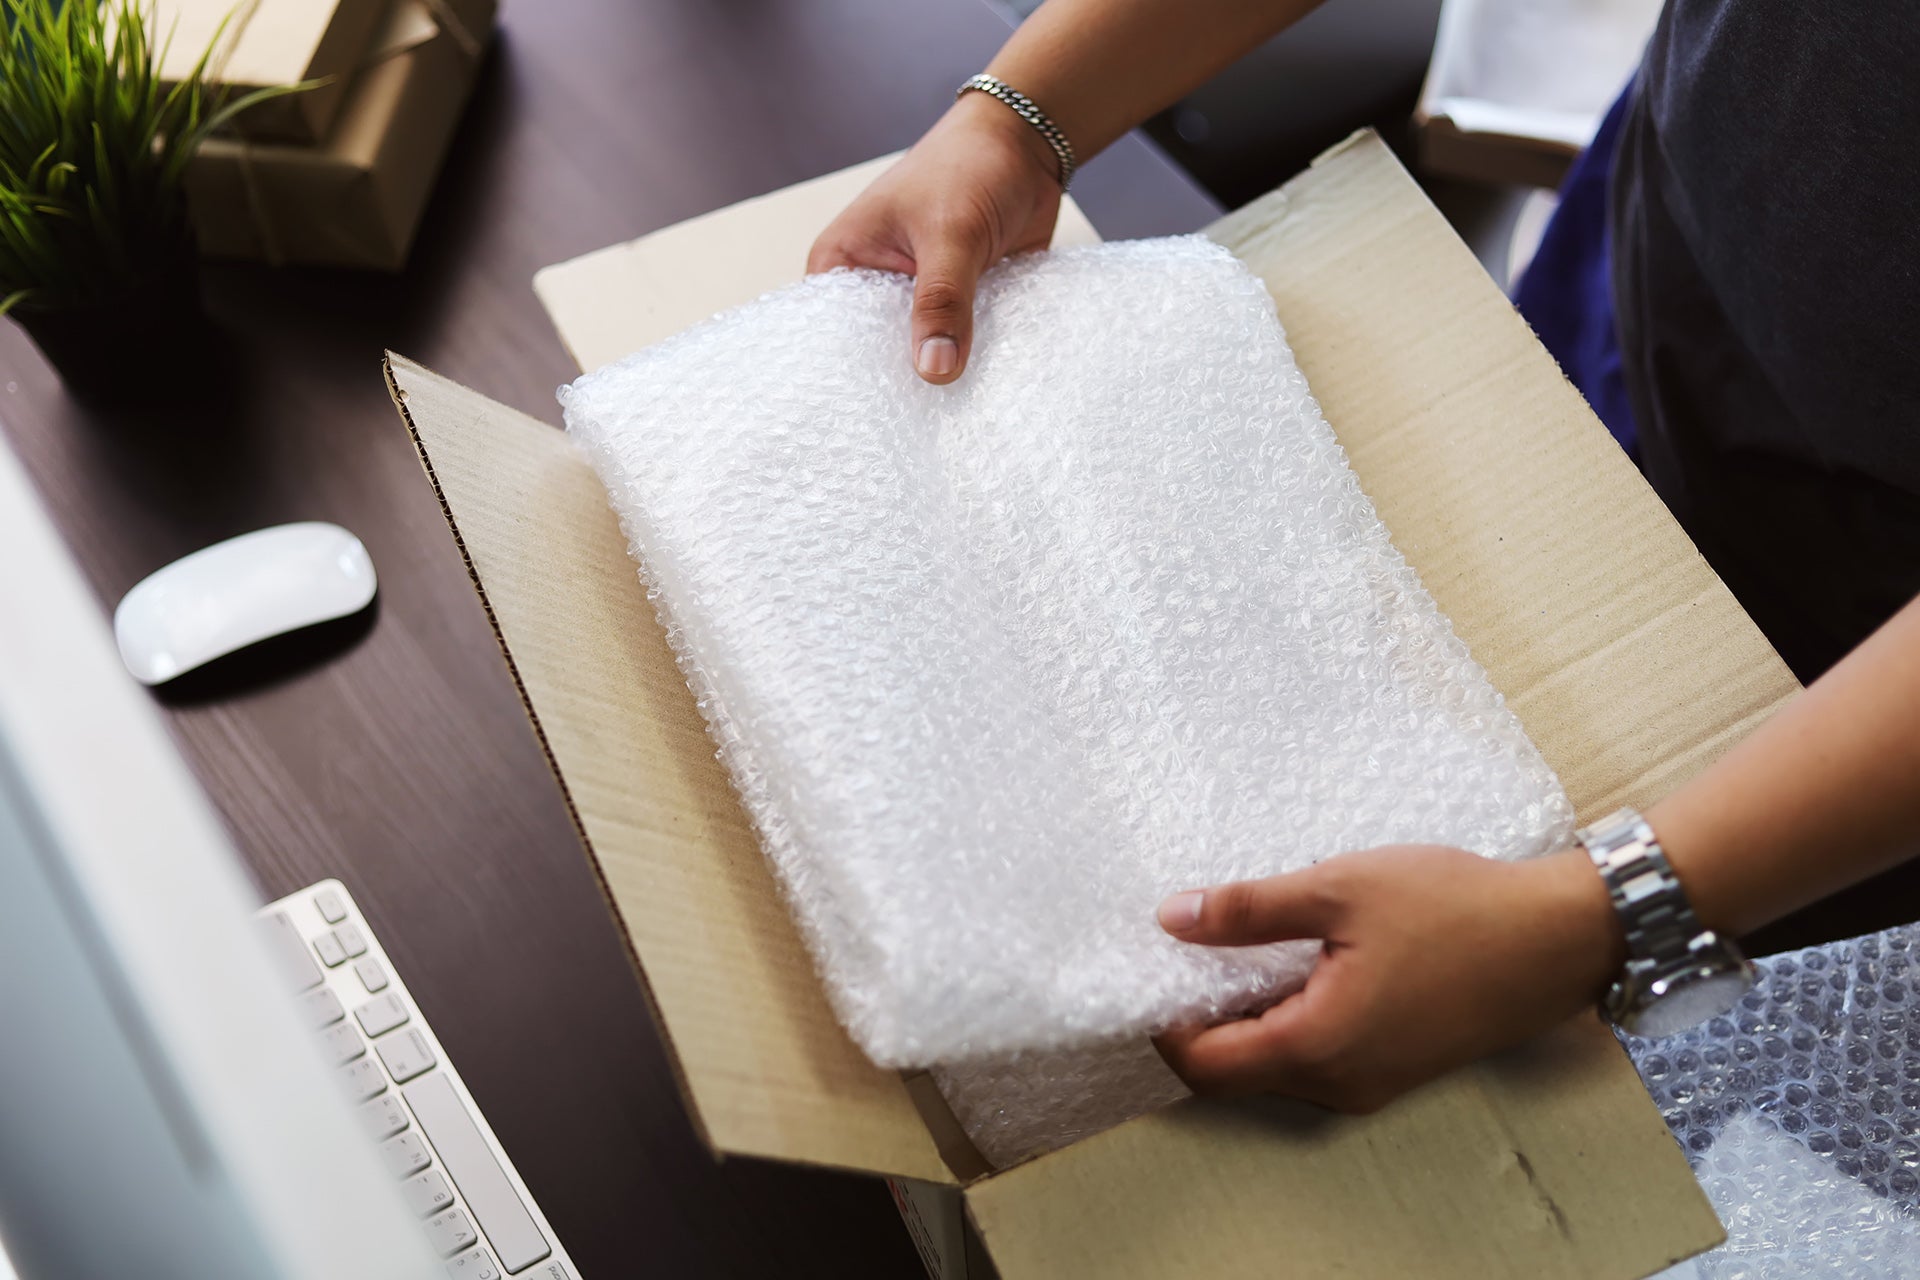 Bubble Wrap - STOCK PACKAGING PROS